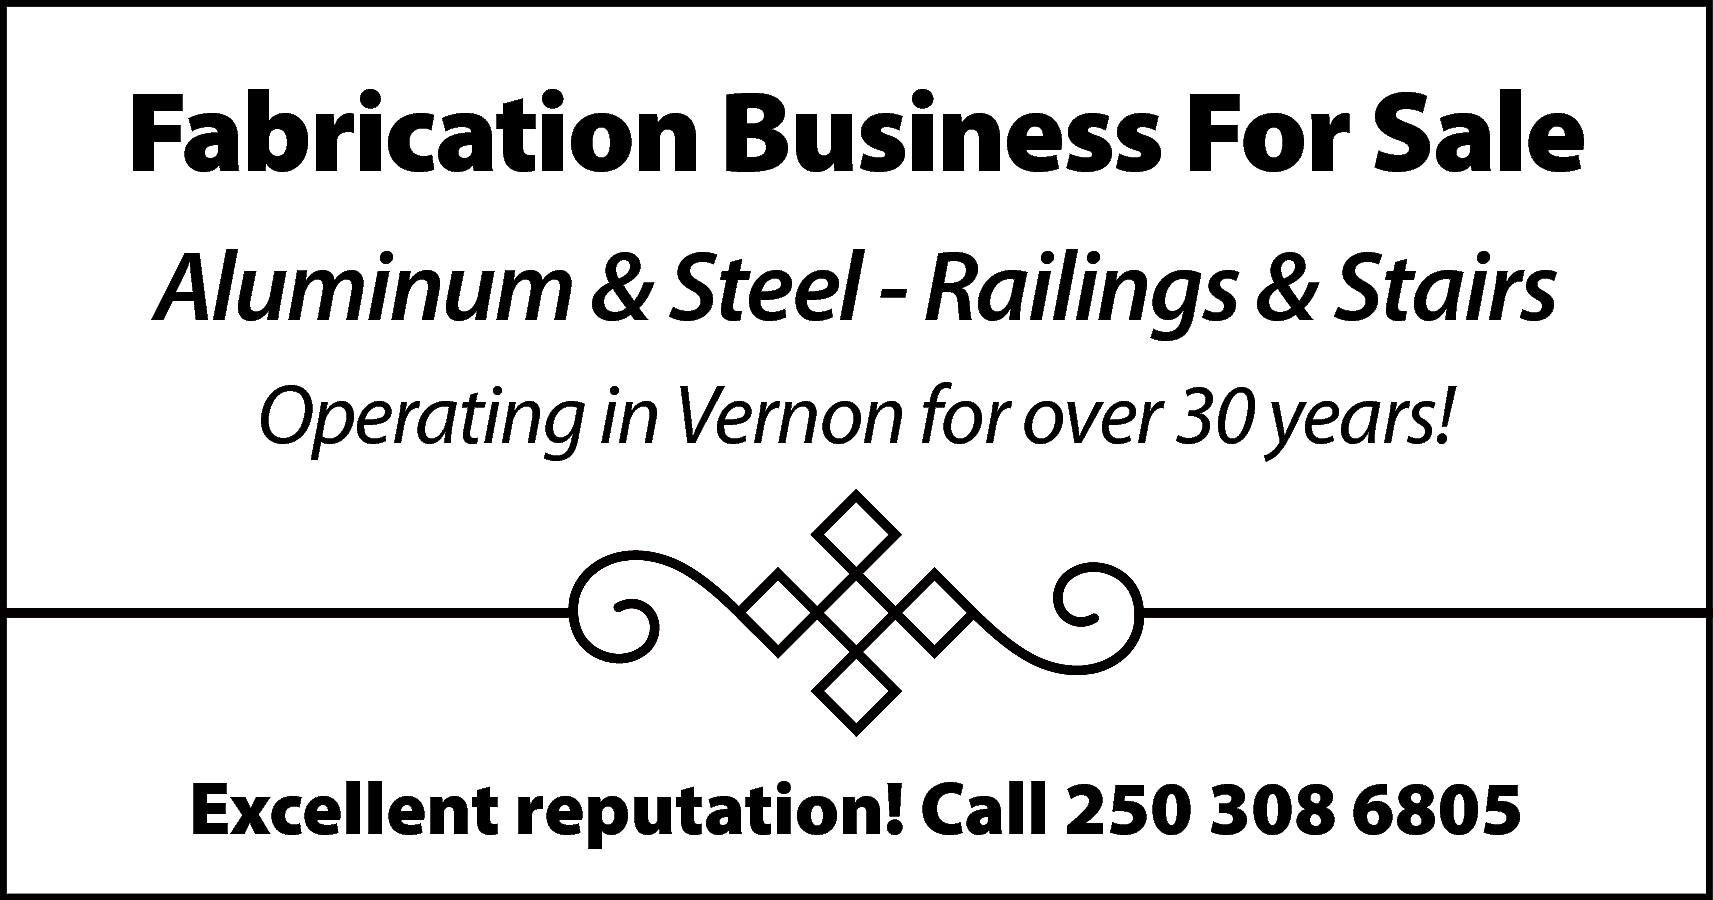 Fabrication Business For Sale <br>Aluminum  Fabrication Business For Sale  Aluminum & Steel - Railings & Stairs  Operating in Vernon for over 30 years!    Excellent reputation! Call 250 308 6805    